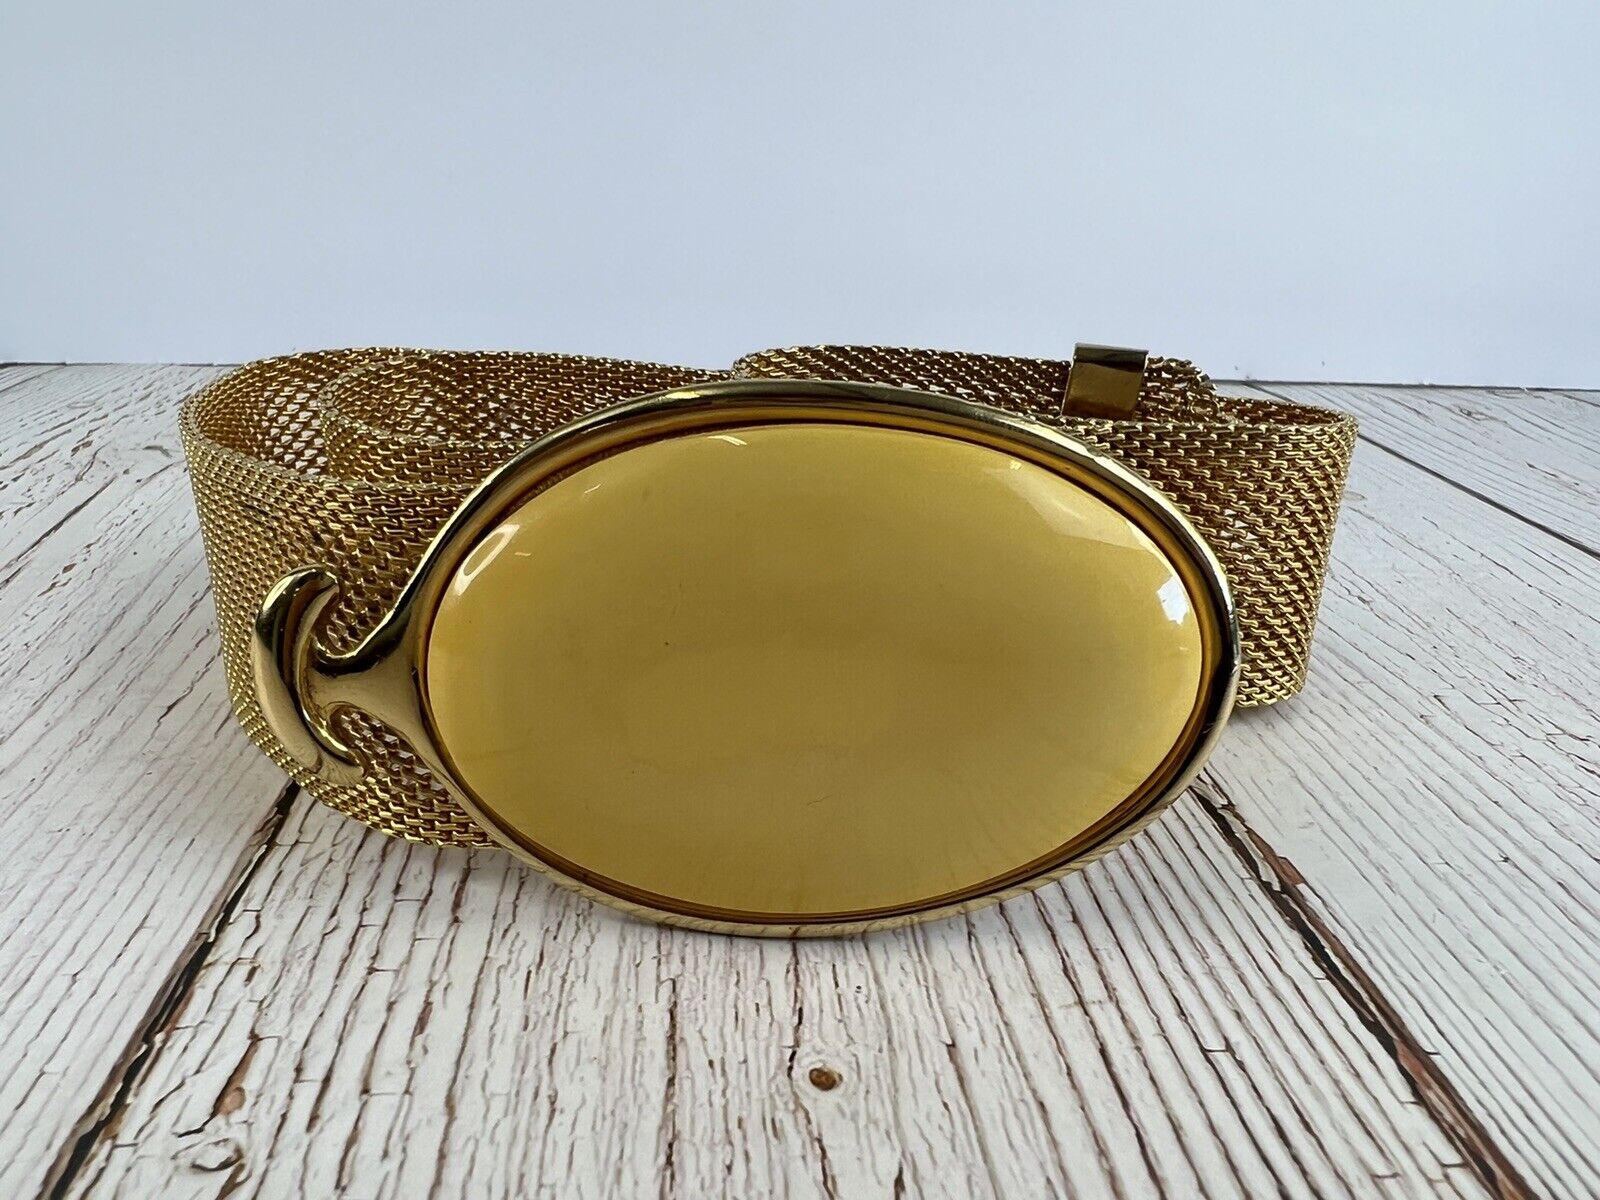 VTG Accessocraft NYC Gold Tone Metal Yellow Chain Link Clasp Belt